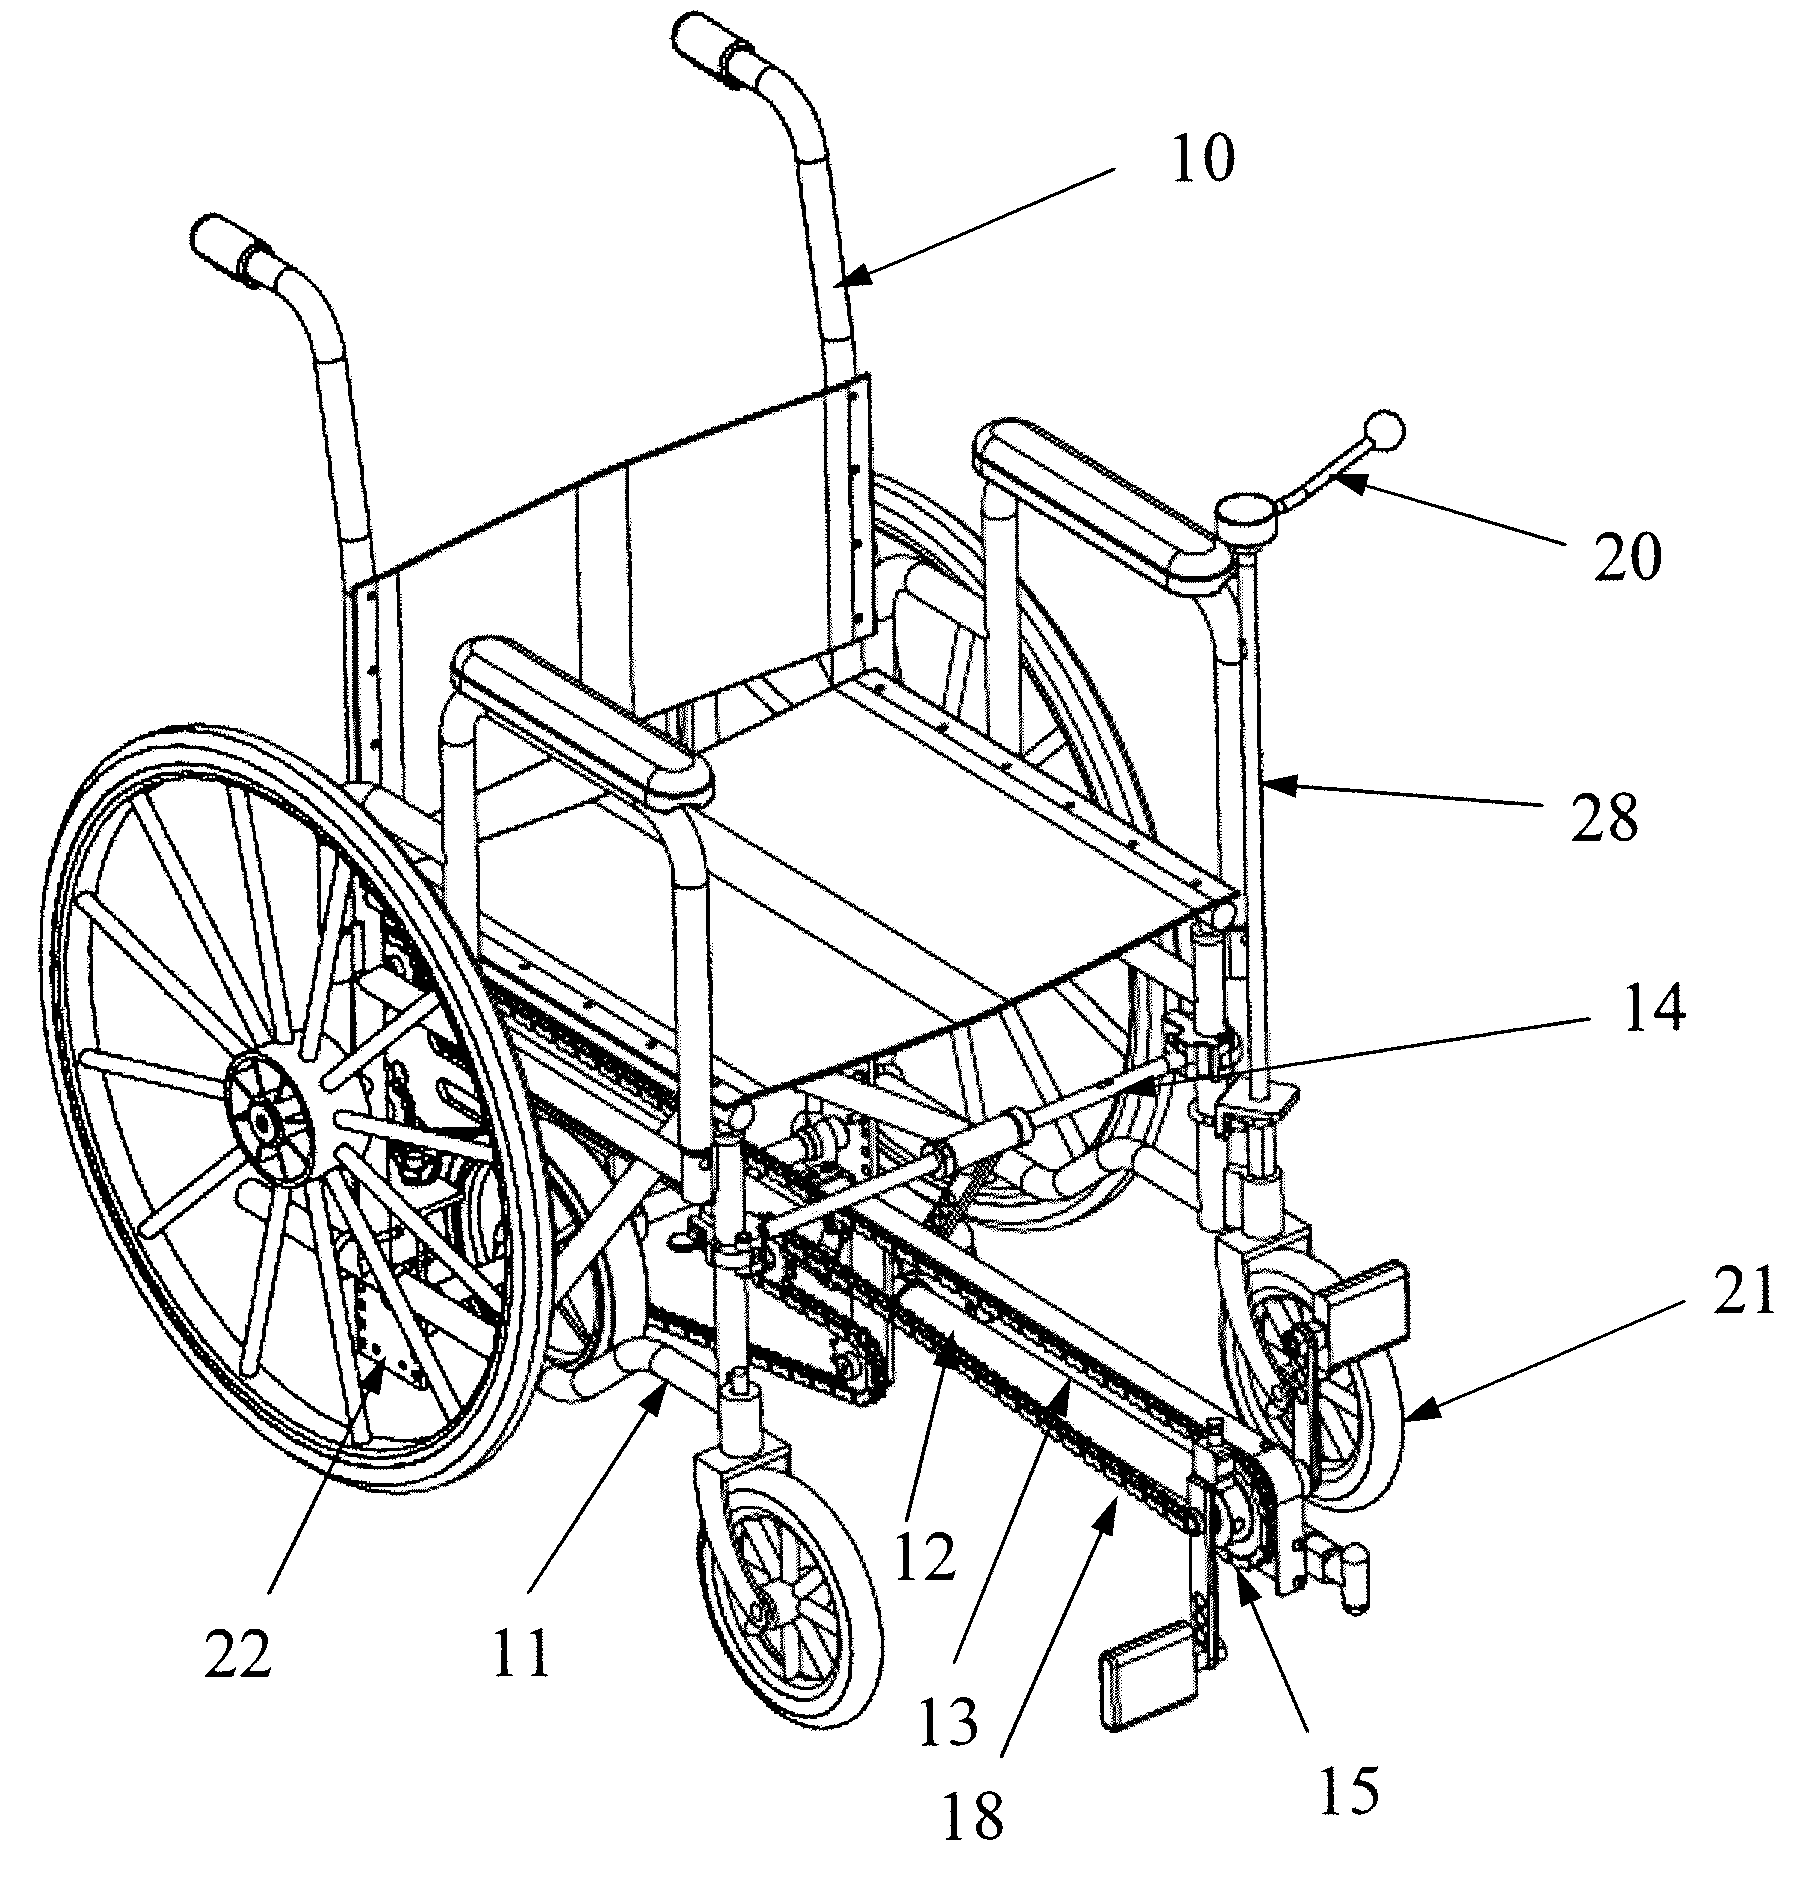 Wheelchair propulsion and exercise attachment